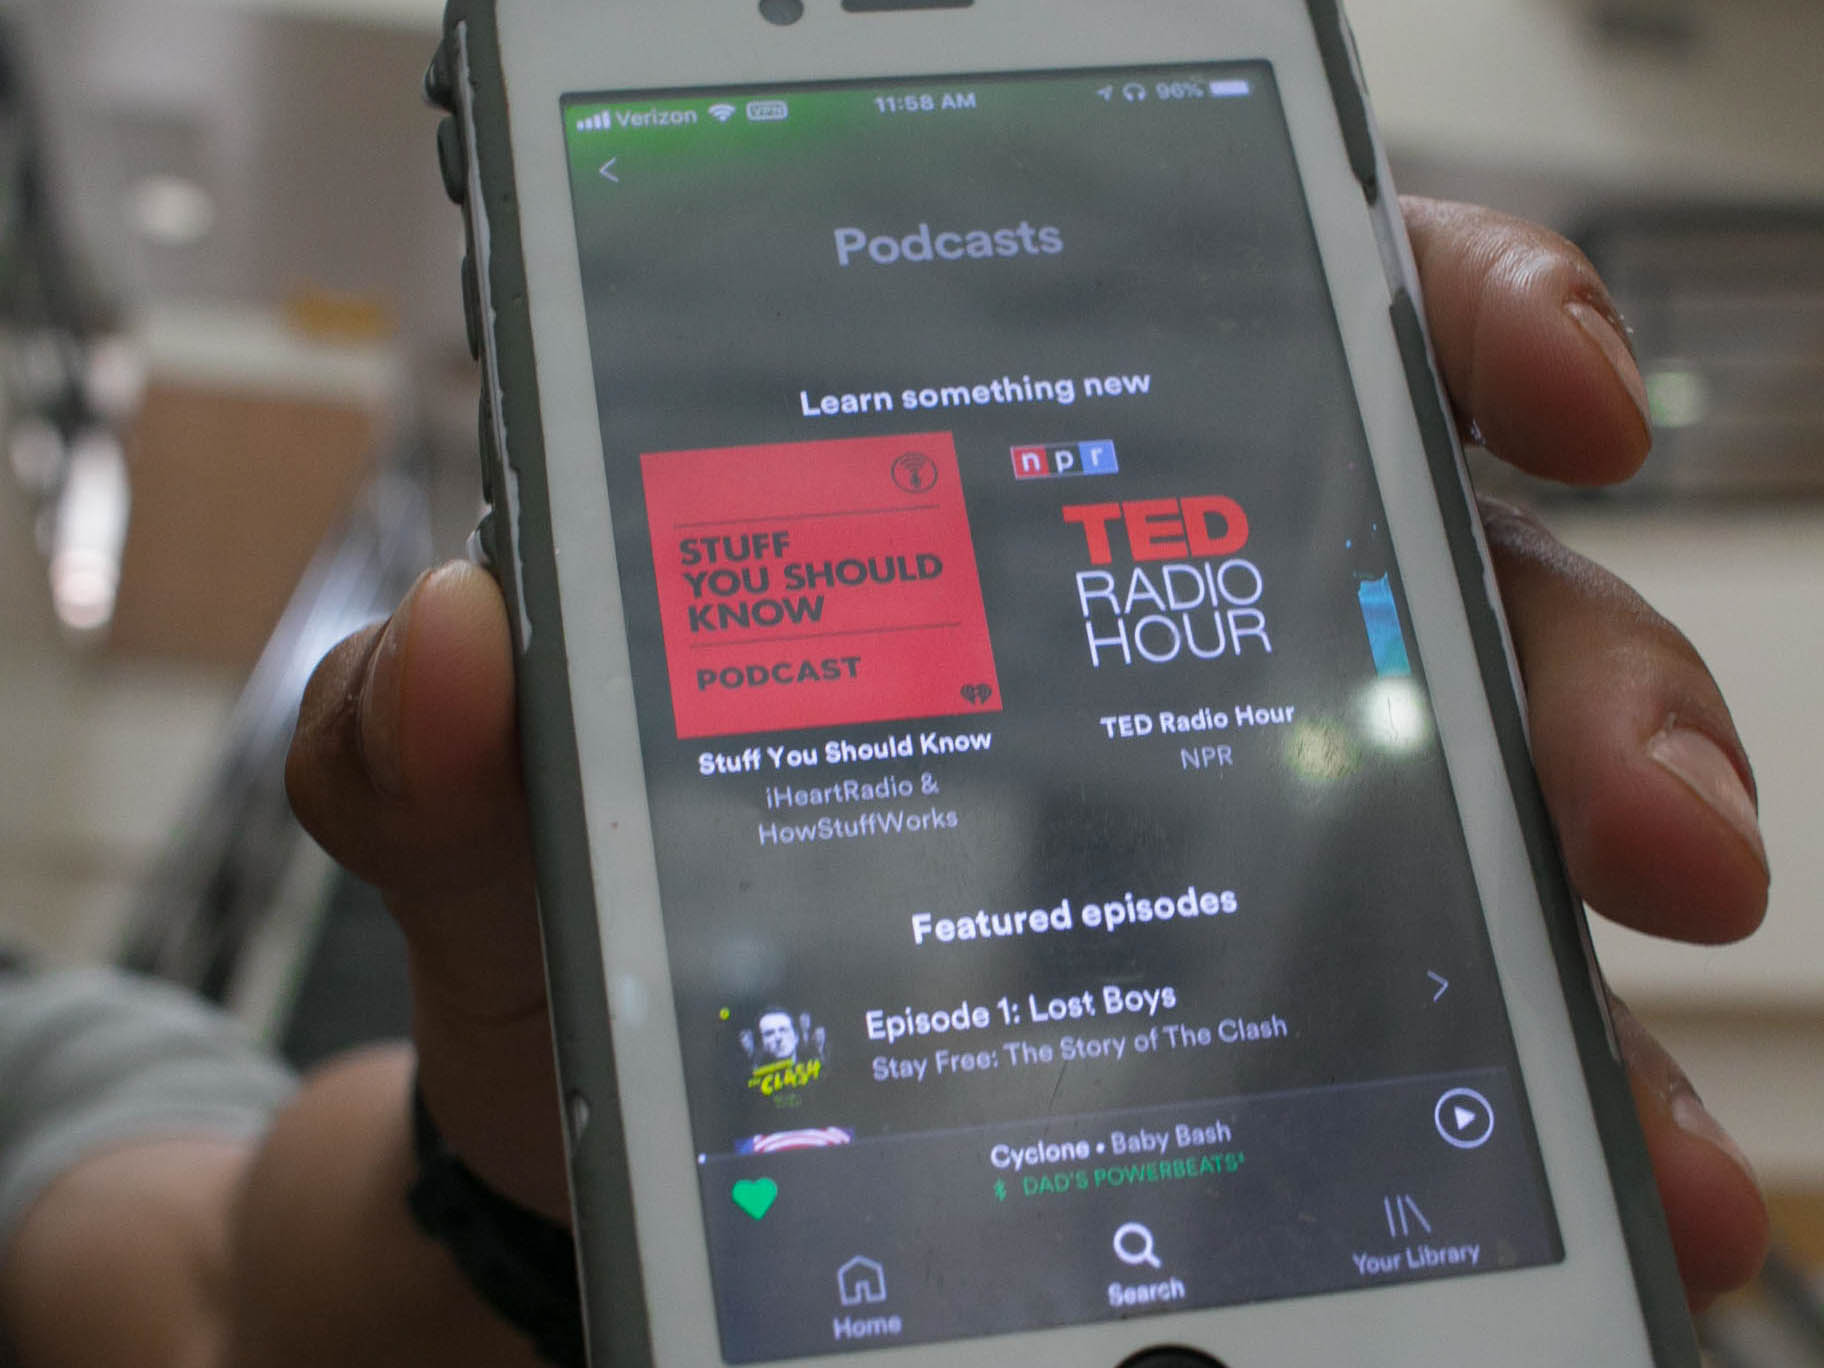 OPINION: Podcasts are beneficial learning tools